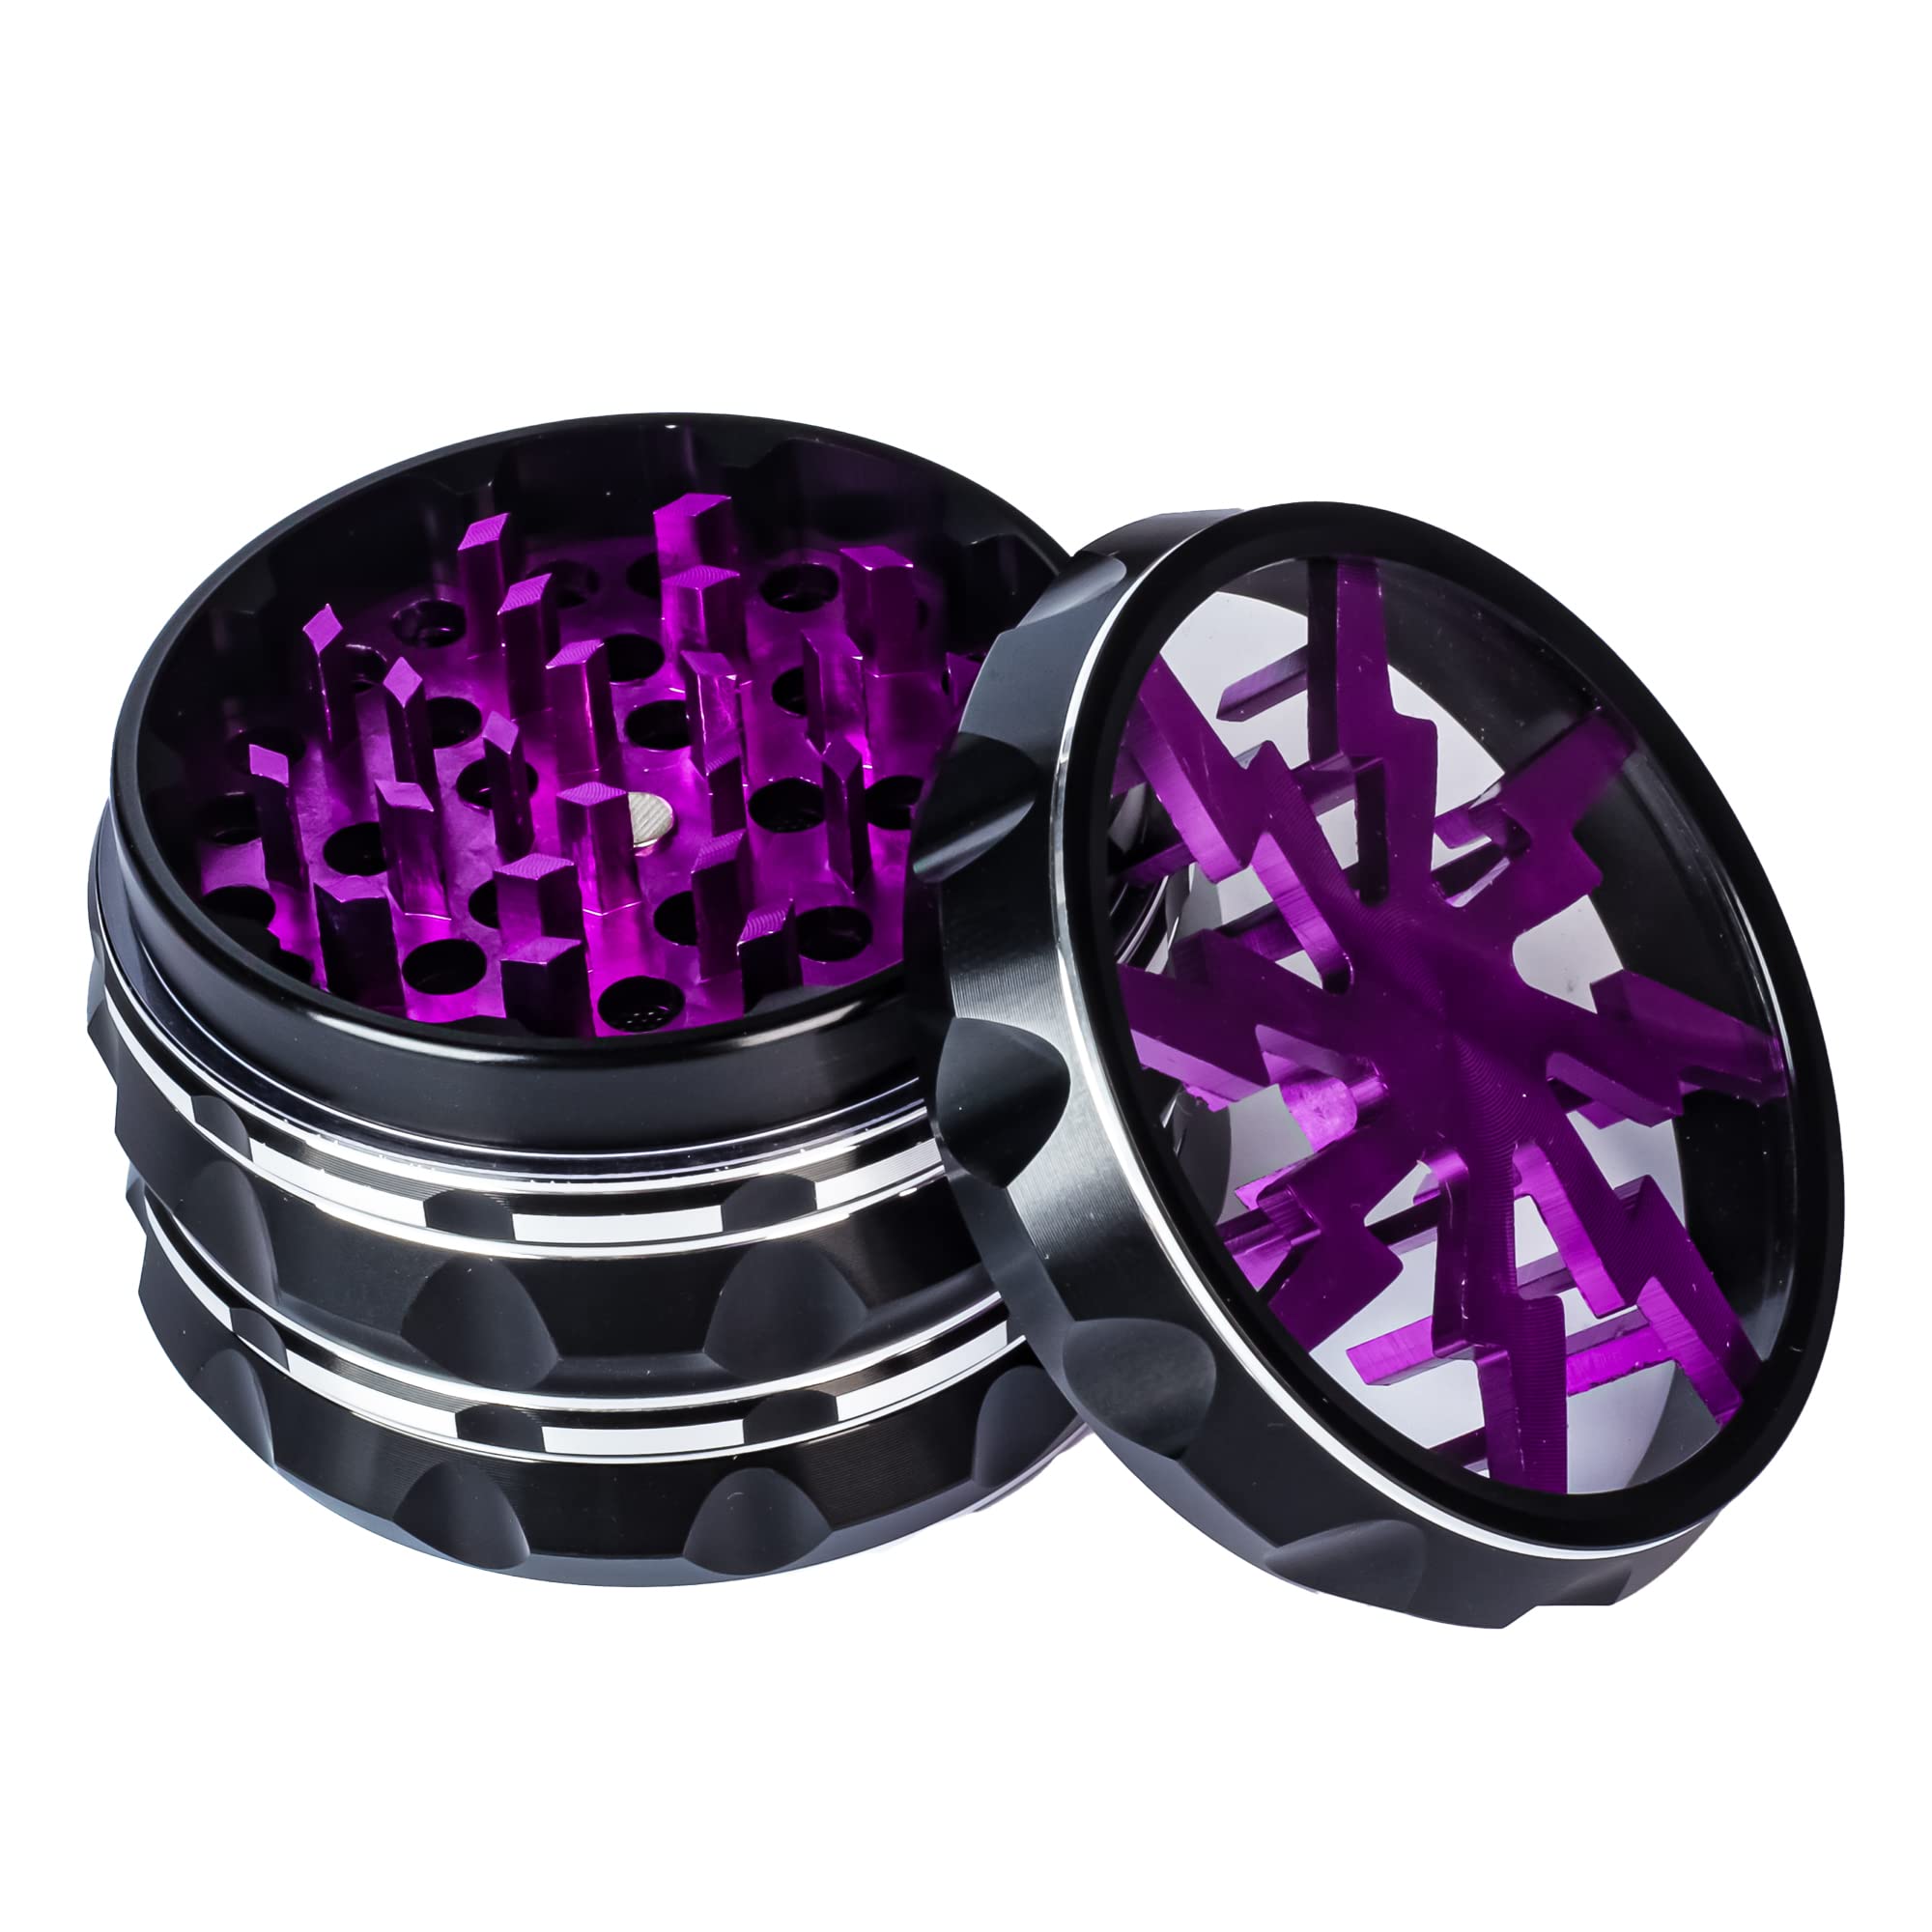 YeJeansion Premium 2.5" Aluminium Grinder, With Black and Purple Lid, Portable and Easy to clean.